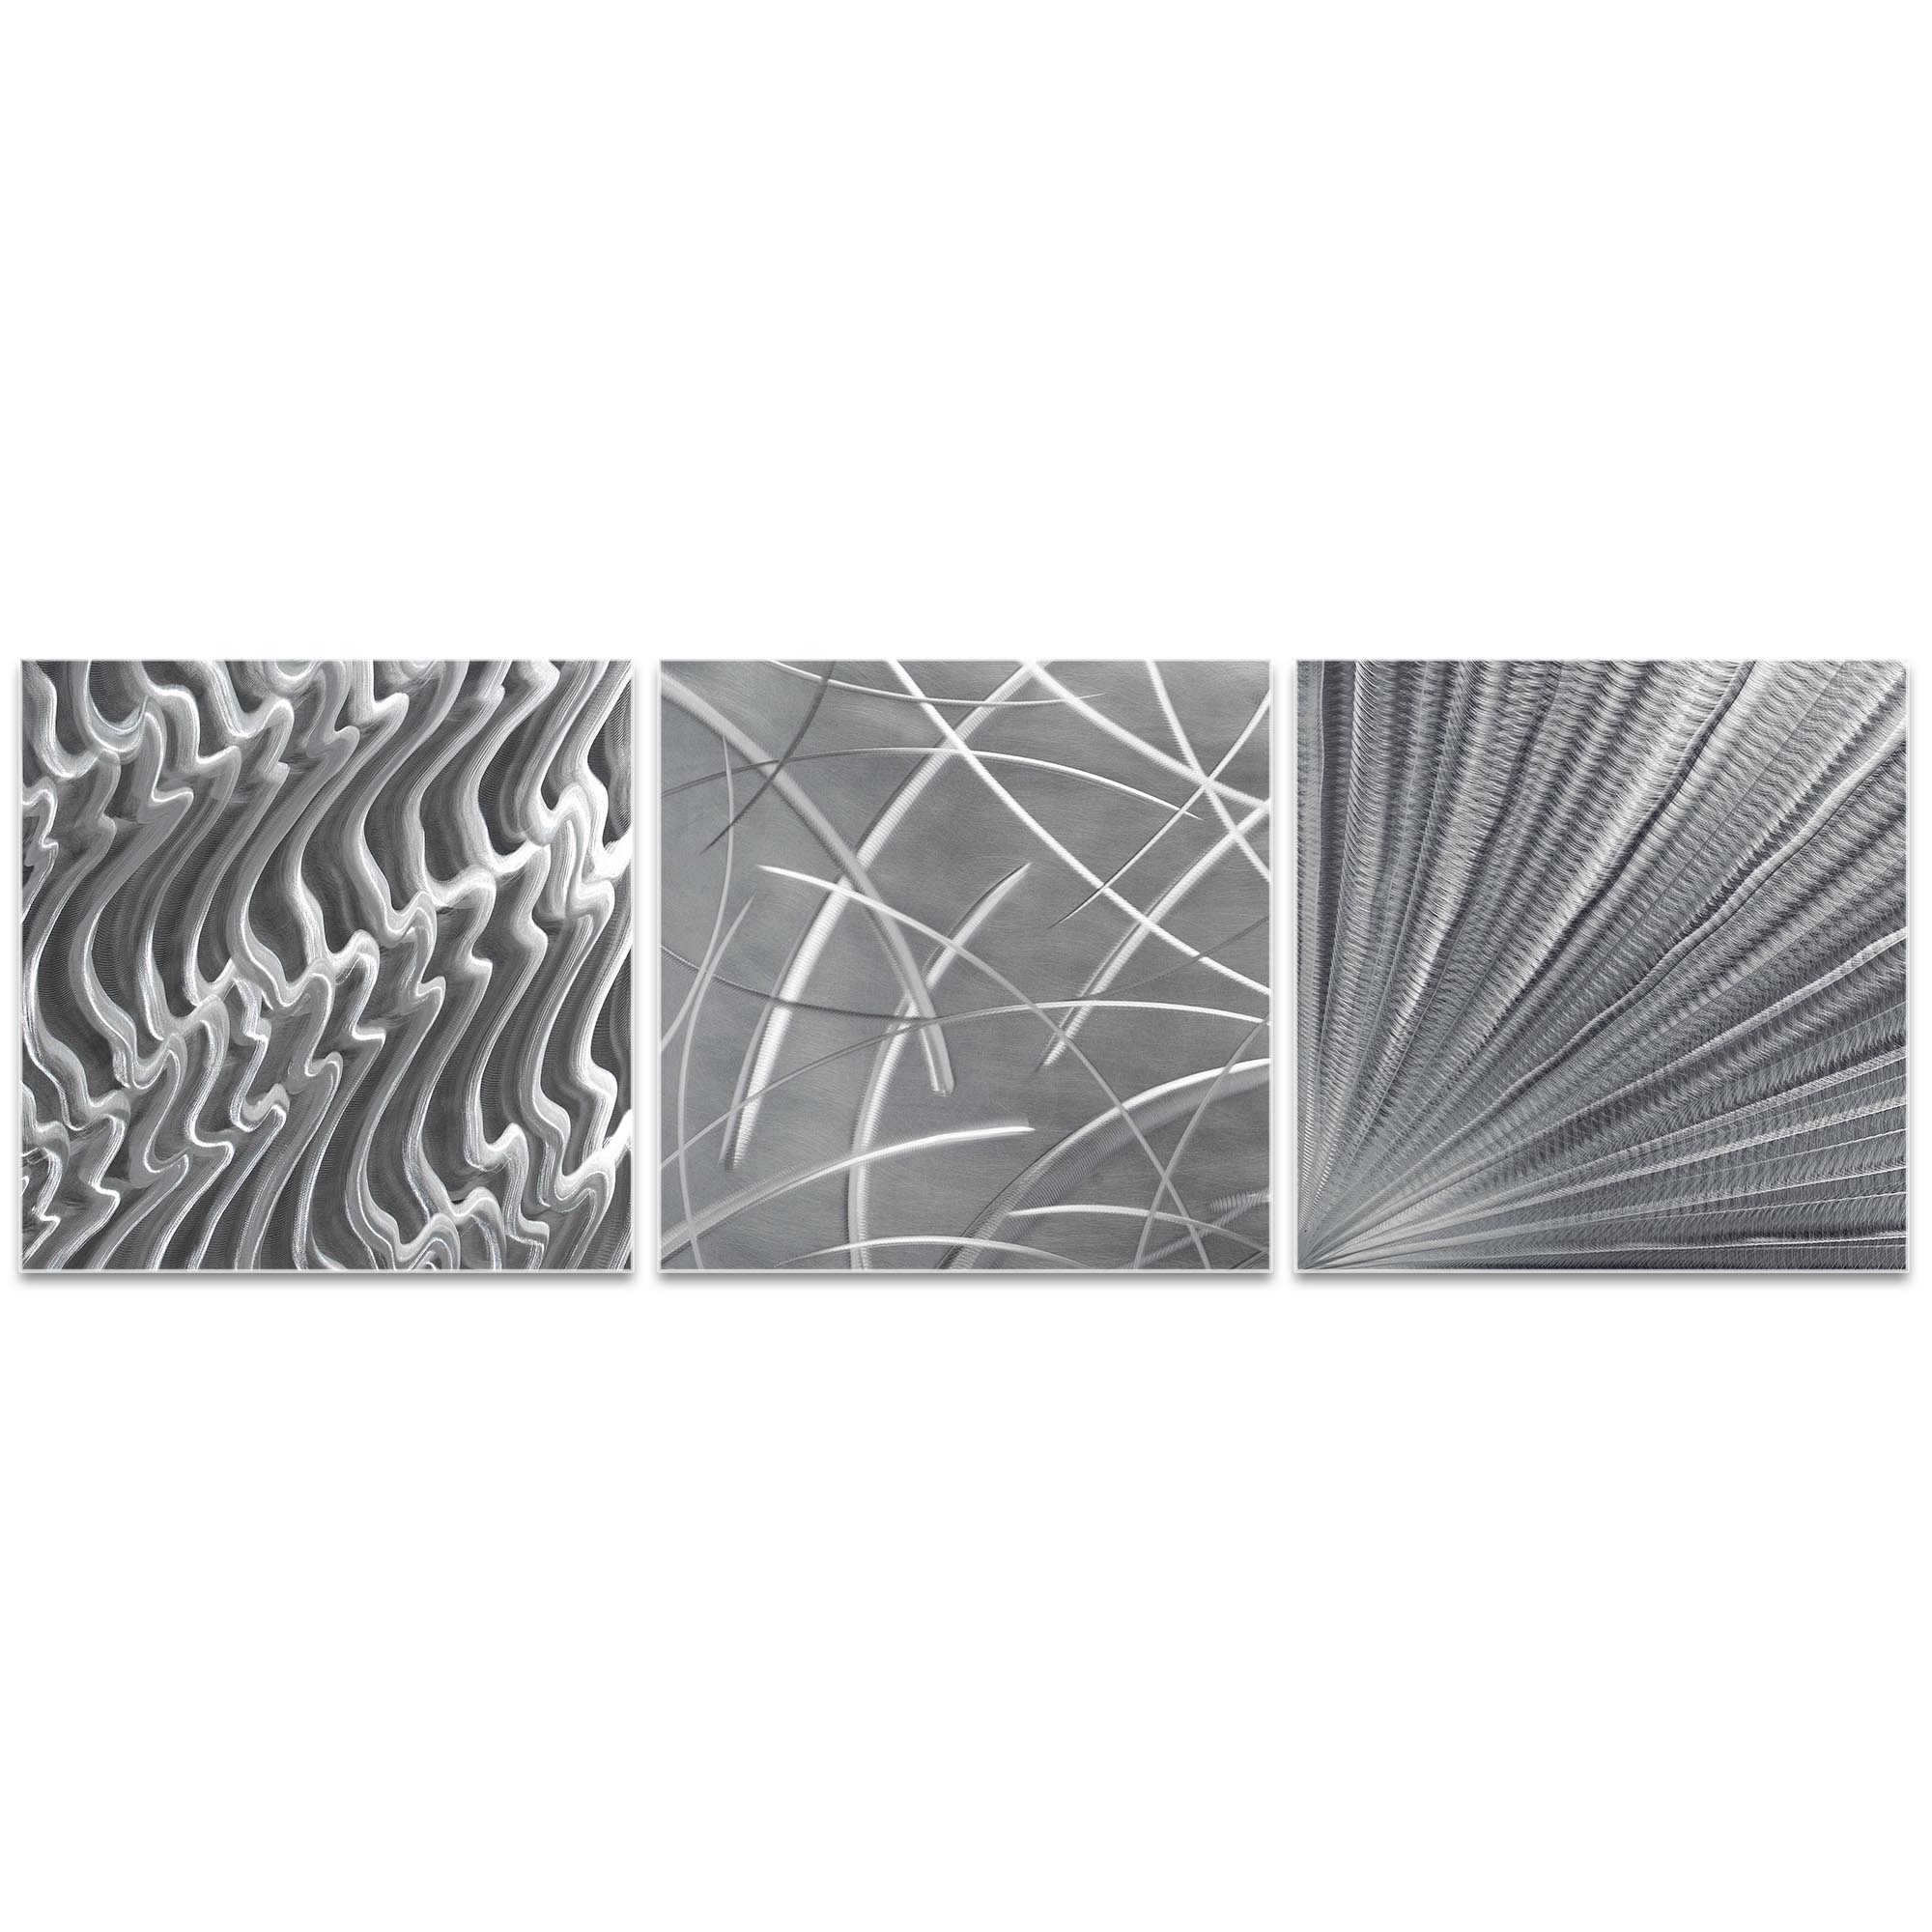 Countless v2 Triptych 38x12in. Metal or Acrylic Contemporary Decor - Image 2